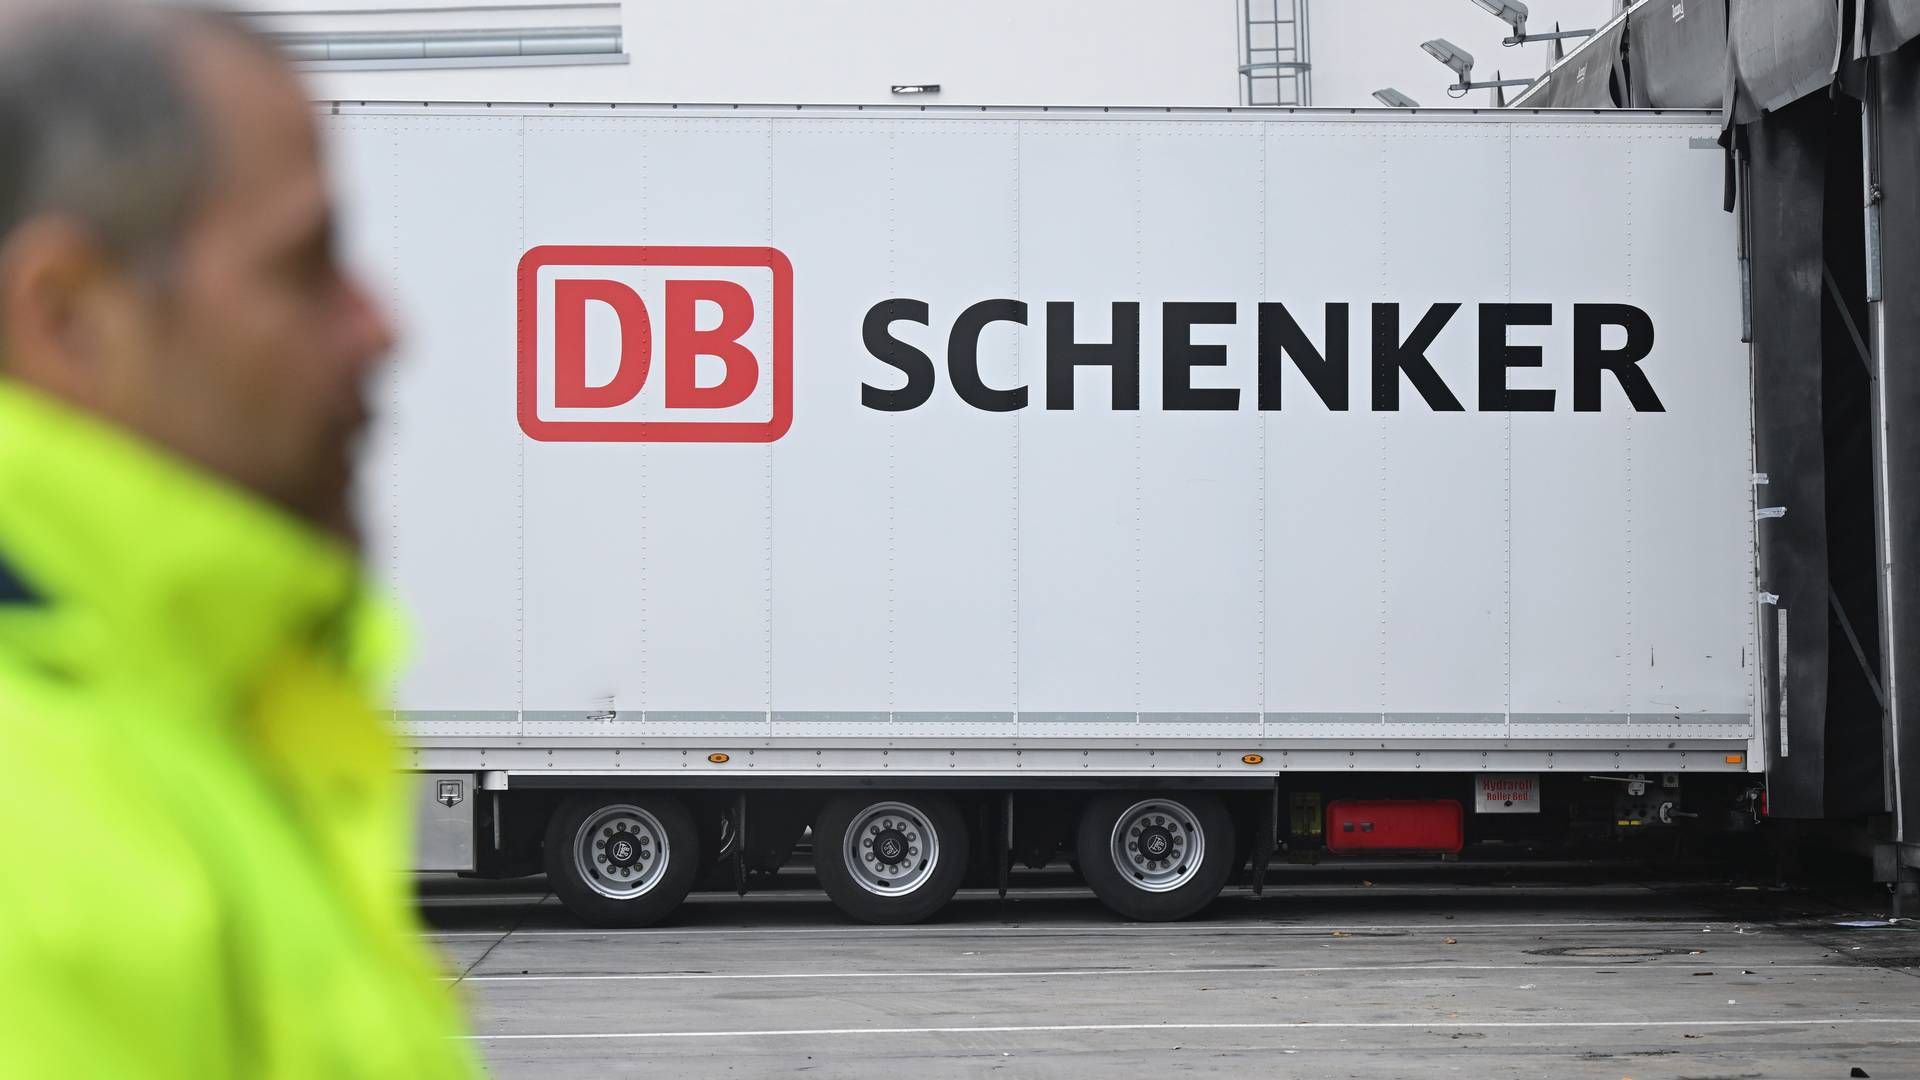 Cindy Cao is replacing Vishal Sharma, who will be Director of DB Schenker's Asia Pacific region.